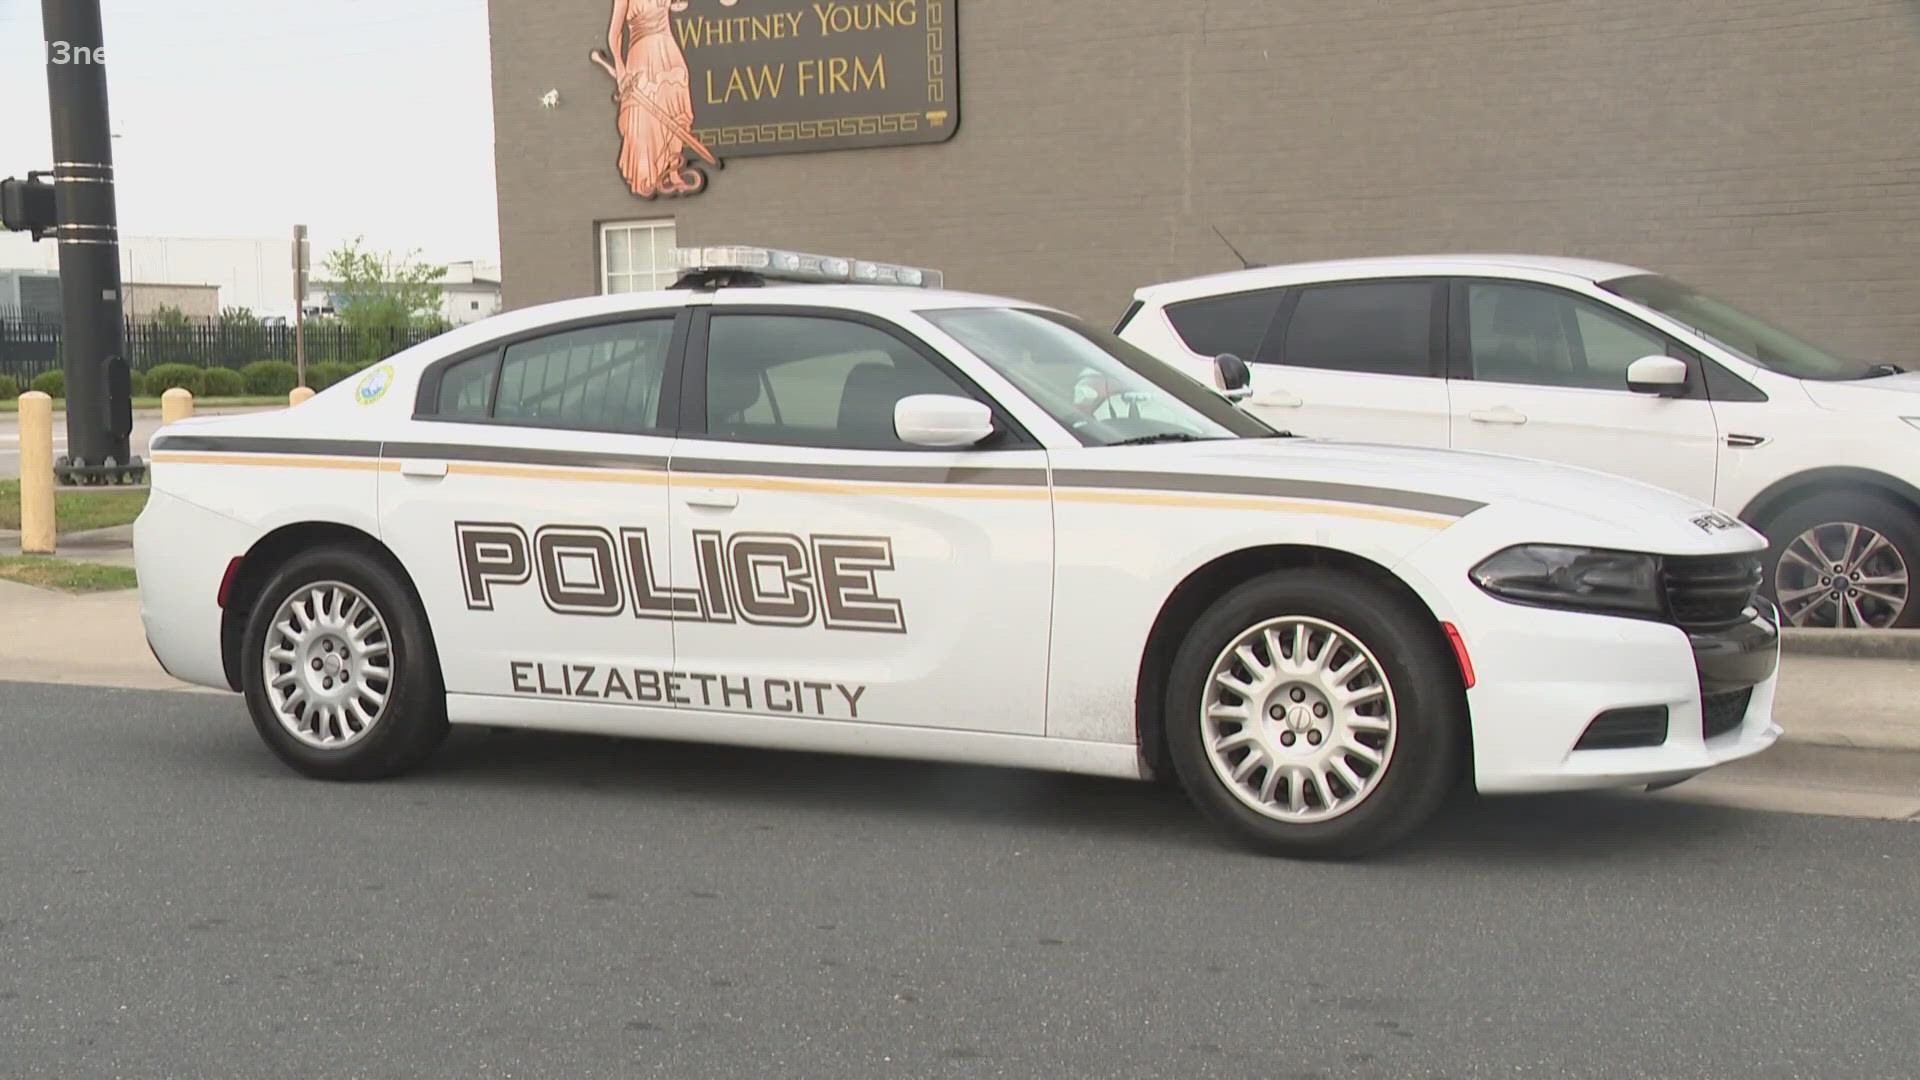 Three different investigations are in motion after an Elizabeth City Police officer shot and killed a man early Saturday.